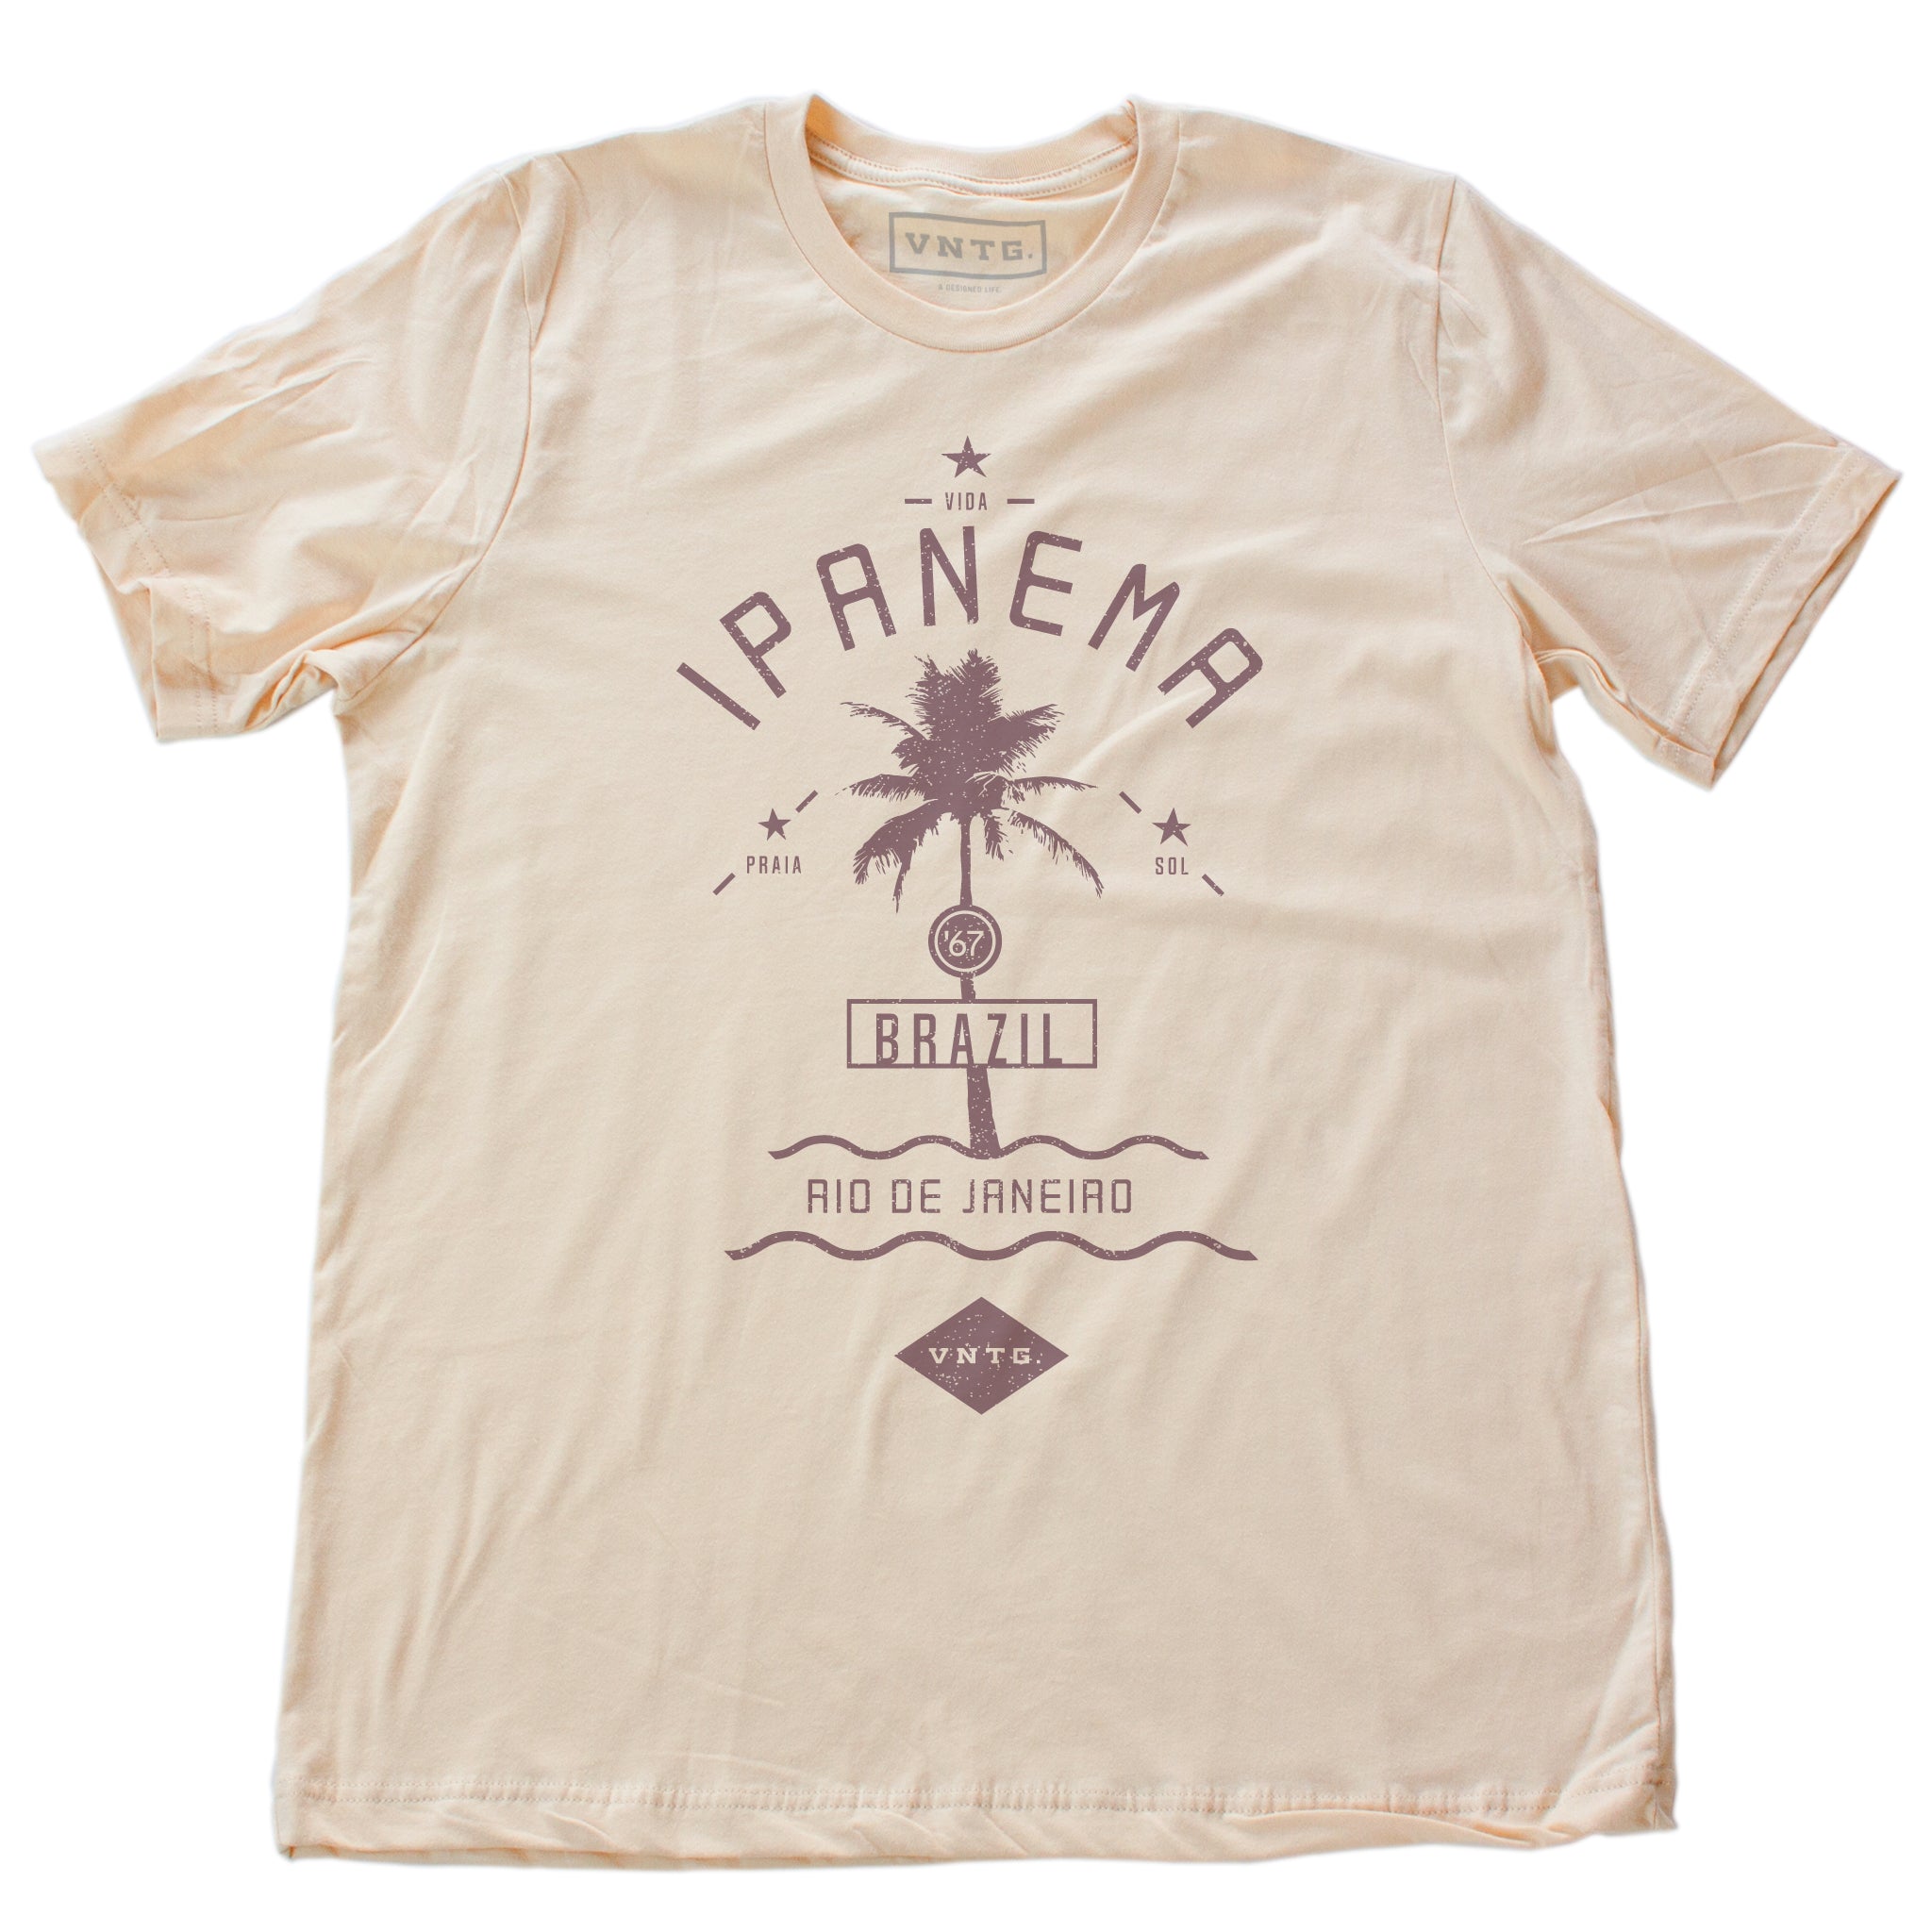 A vintage-inspired, Classic retro t-shirt in Soft Cream, featuring a graphic of a single palm tree over waves, as a tourism promotion for Ipanema beach, in Rio de Janeiro, Brazil. By fashion brand VNTG., from Wolfsaint.net